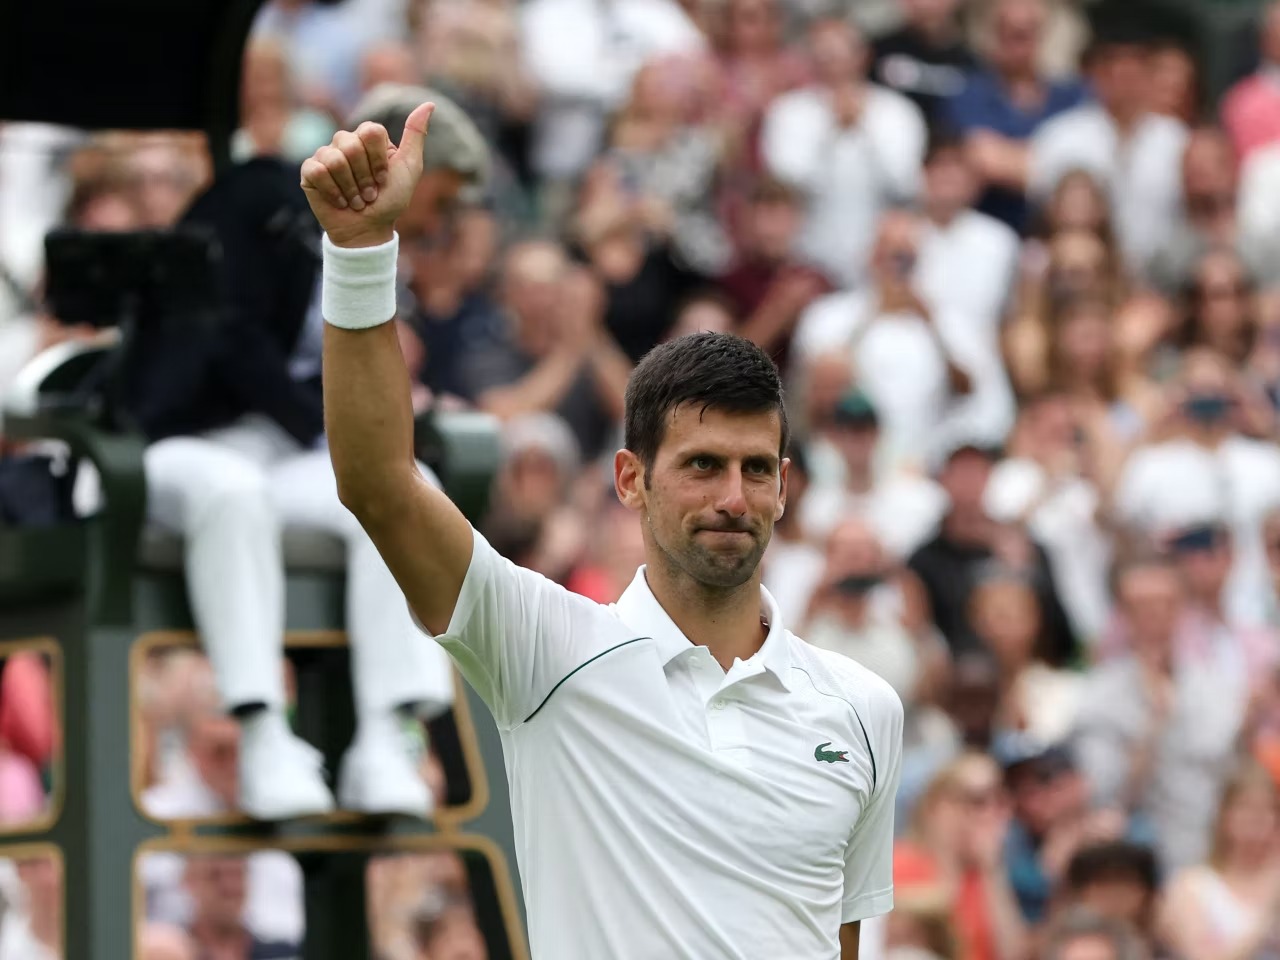 Wimbledon 2022 FINAL LIVE: Former member of Novak Djokovic's team claims Serbian 'Scared of Nick Kyrgios' serve' ahead of the GRAND FINALE